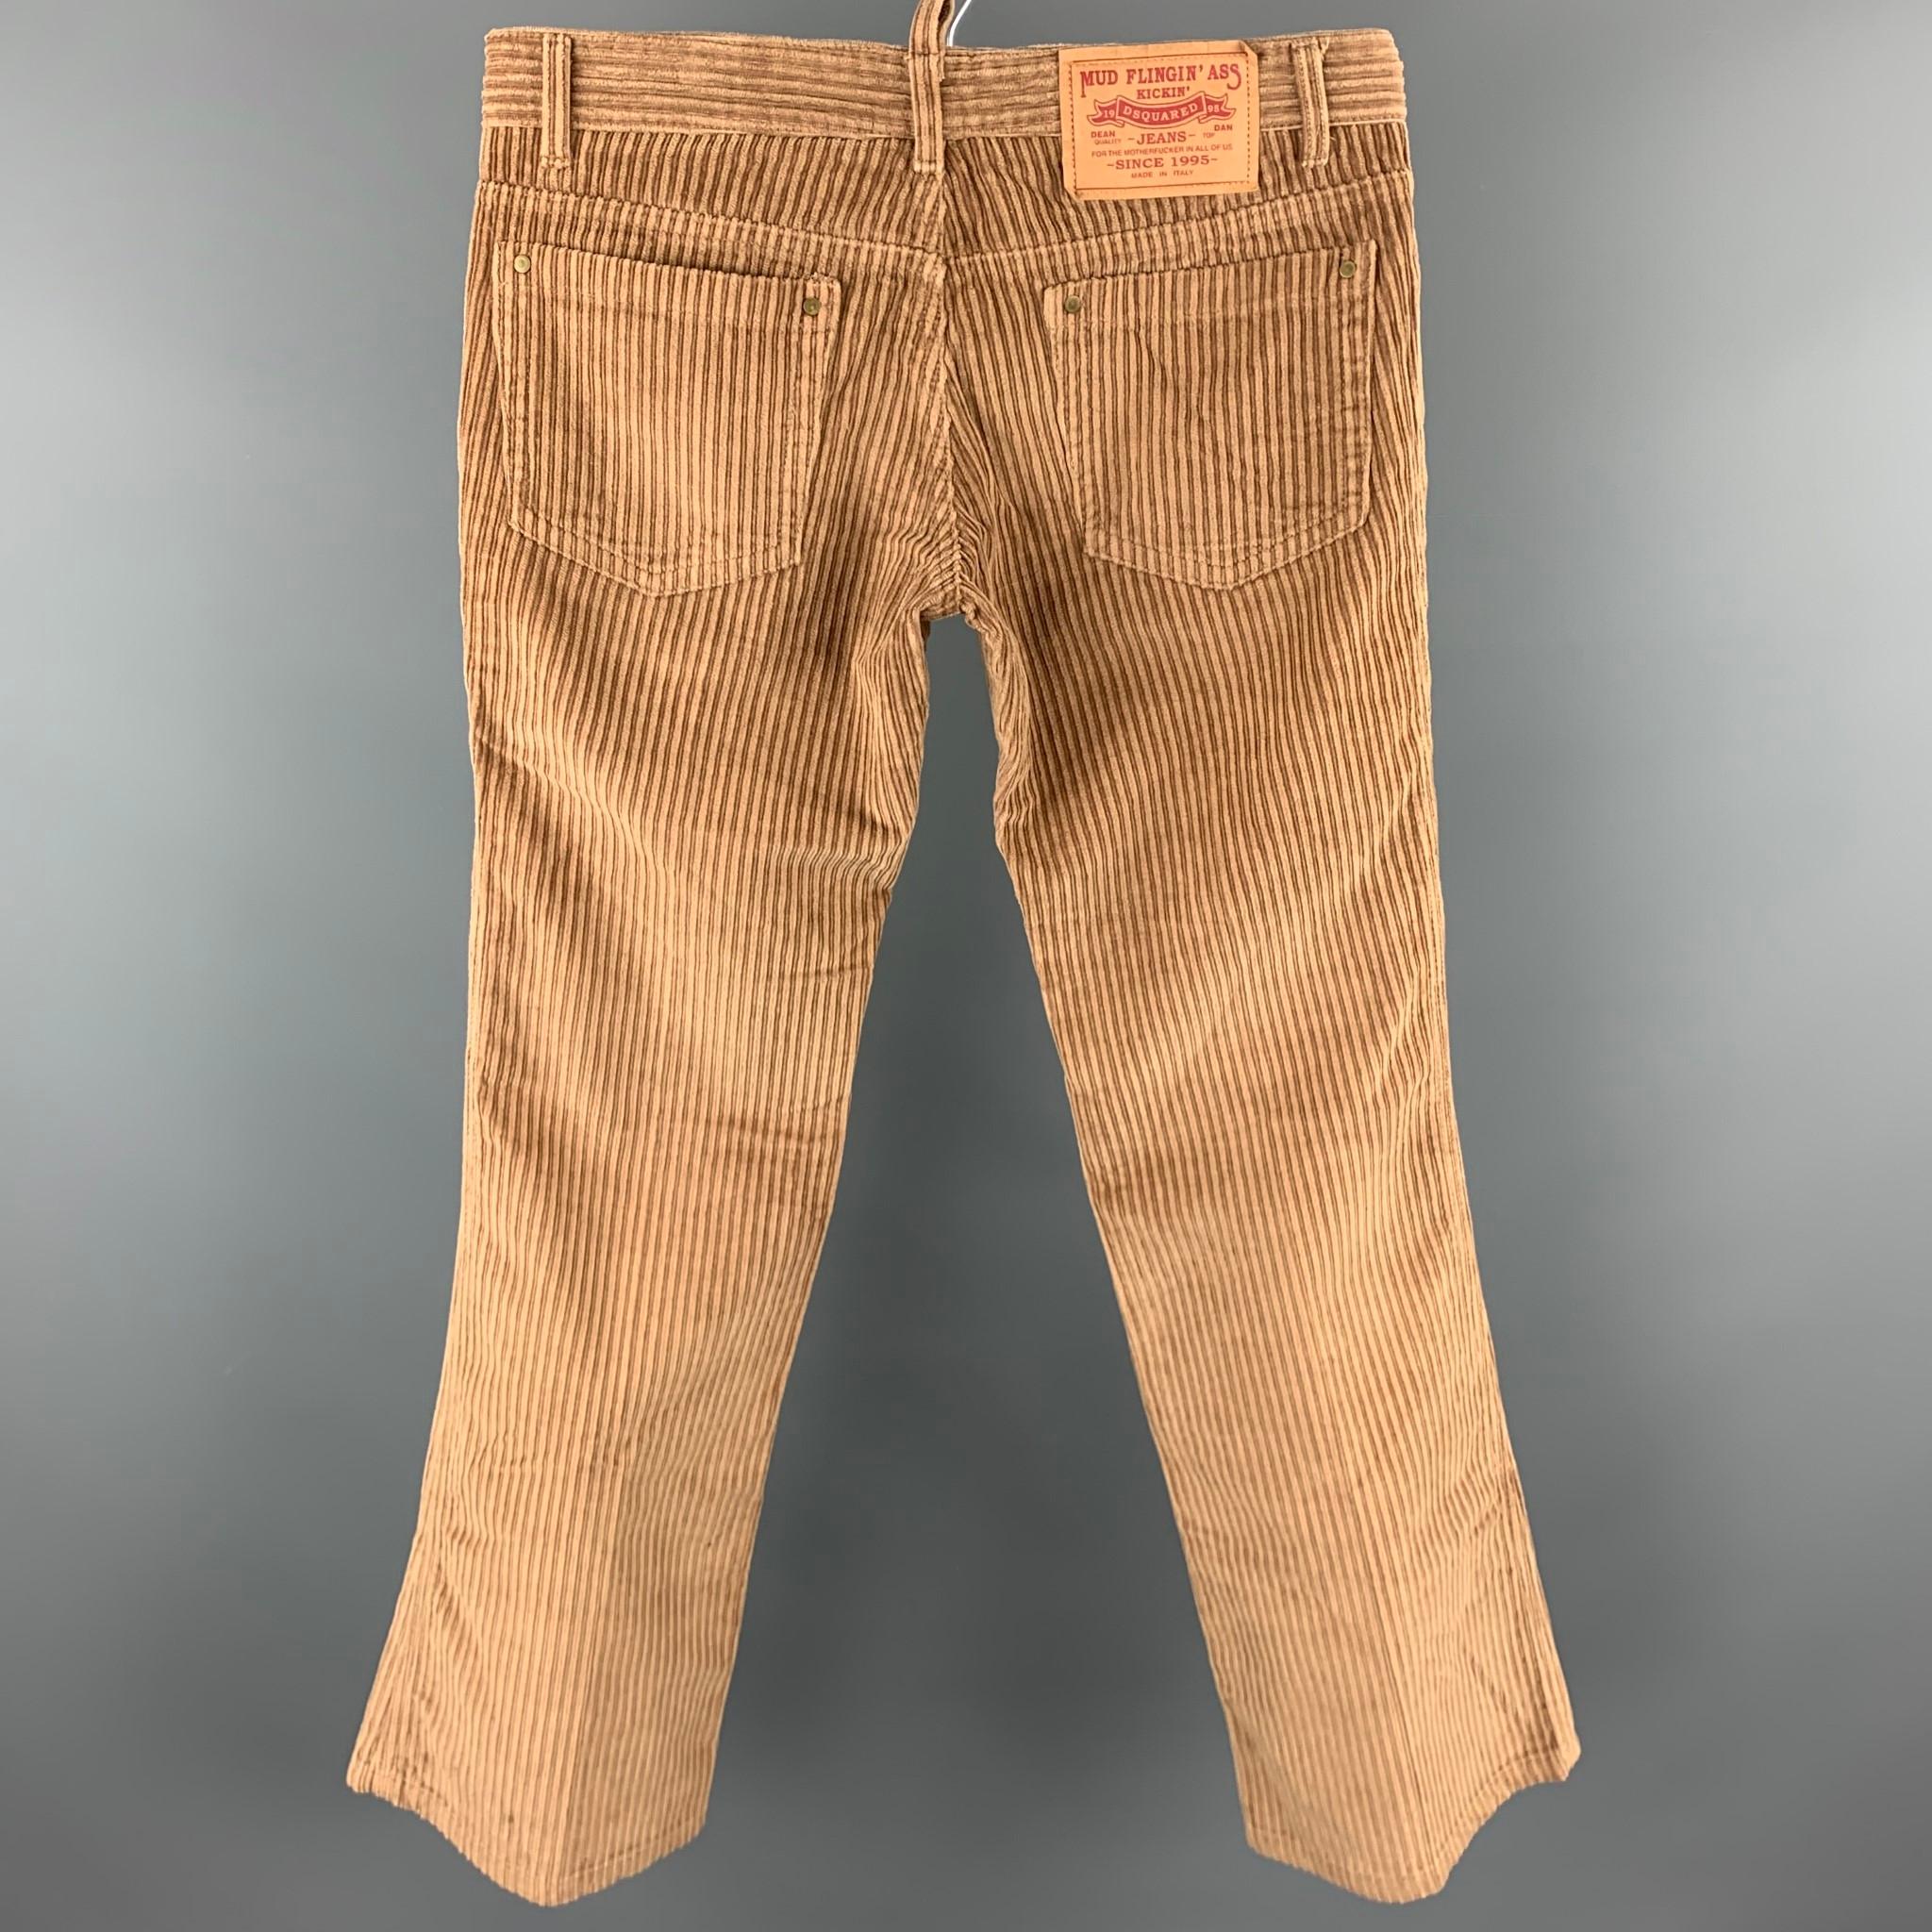 Orange DSQUARED2 Size 30 Tan Corduroy Home Is Where The Heart Is Jean Cut Pants